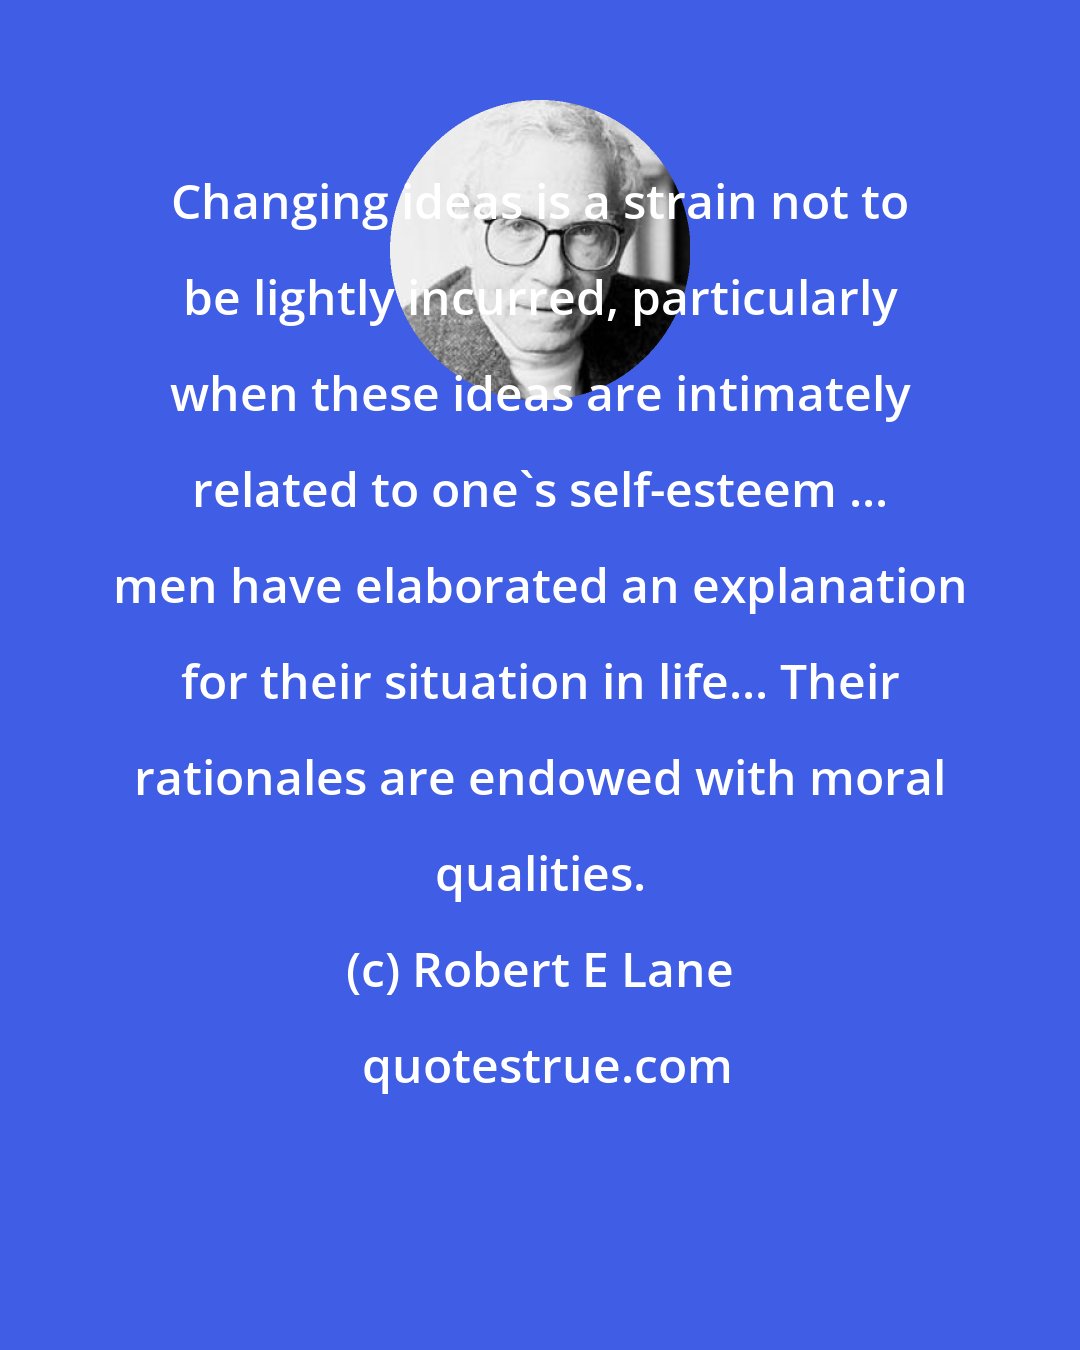 Robert E Lane: Changing ideas is a strain not to be lightly incurred, particularly when these ideas are intimately related to one's self-esteem ... men have elaborated an explanation for their situation in life... Their rationales are endowed with moral qualities.